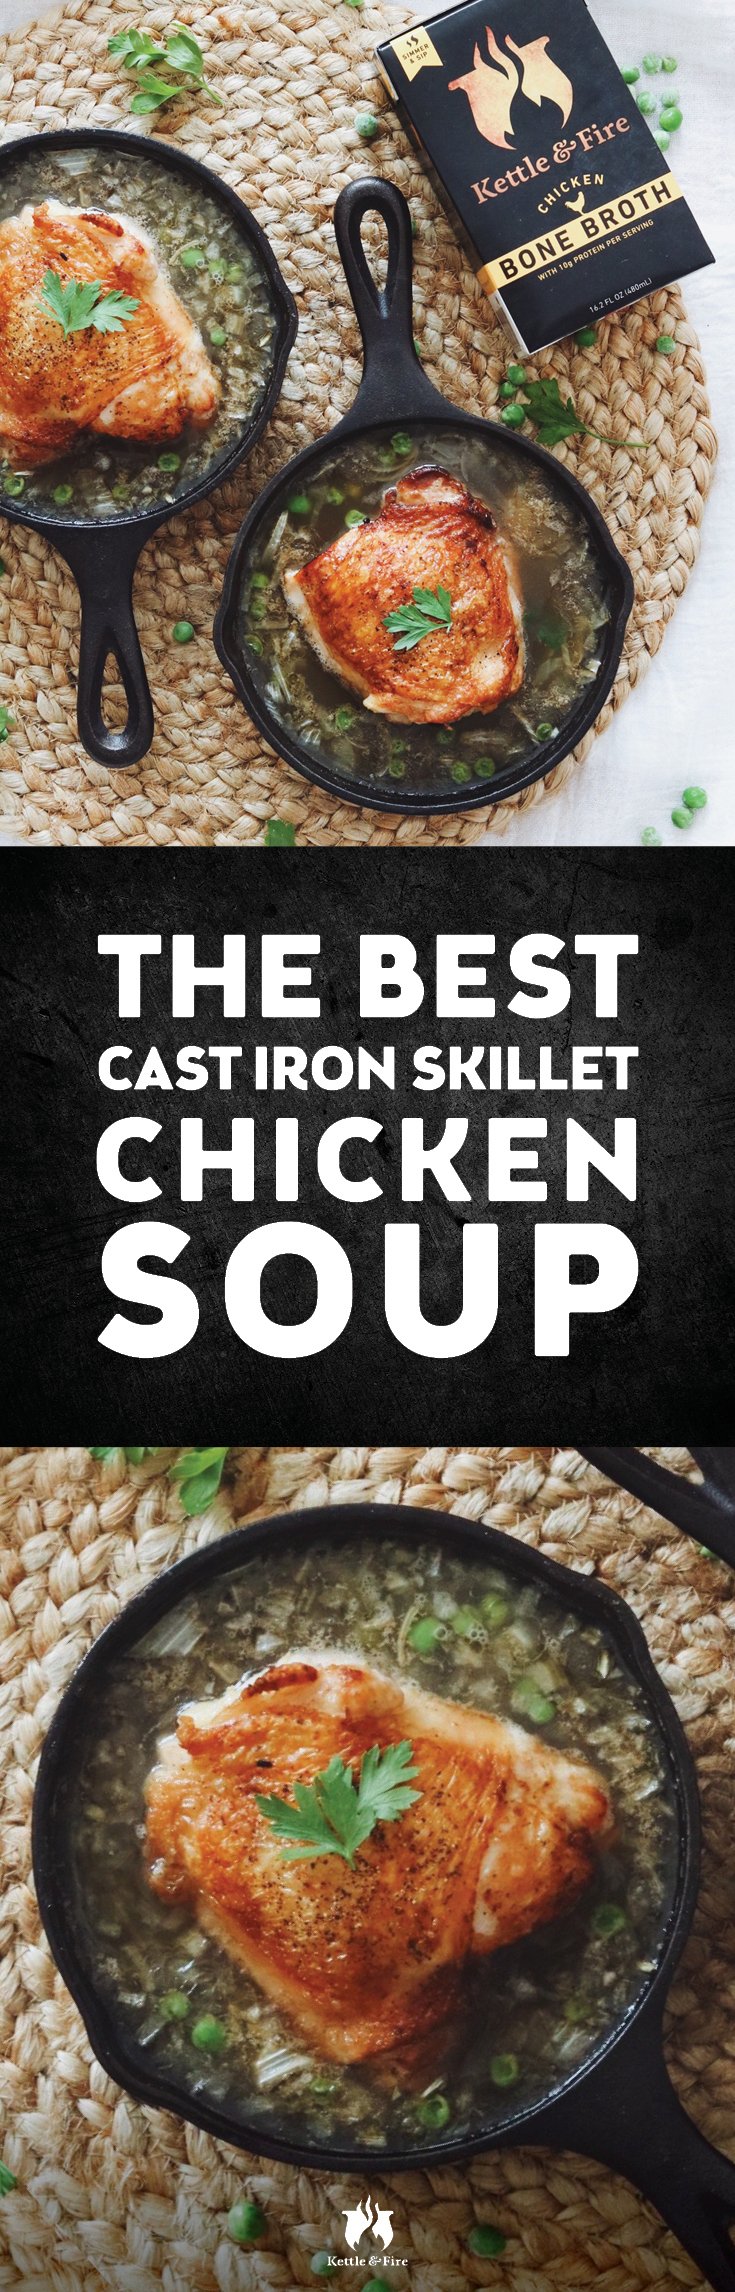 This cast iron skillet chicken soup is packed with flavor and nutrition from chicken bone broth, and herbs such as parsley, garlic, onion, and black pepper. 